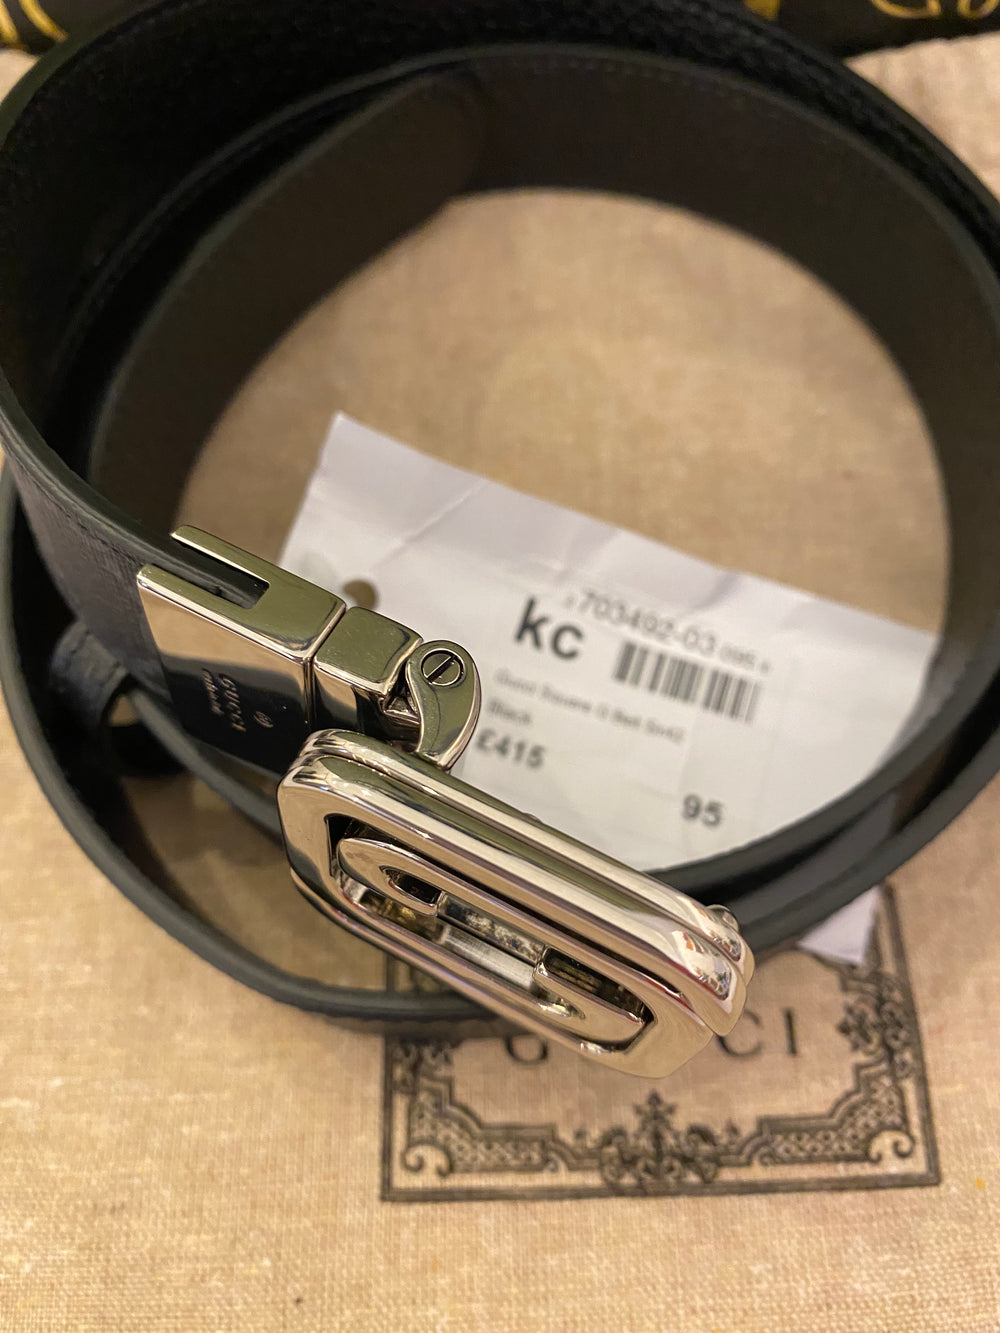 Pre Loved Gucci Square Supreme G Belt size 95mm (new with tags)